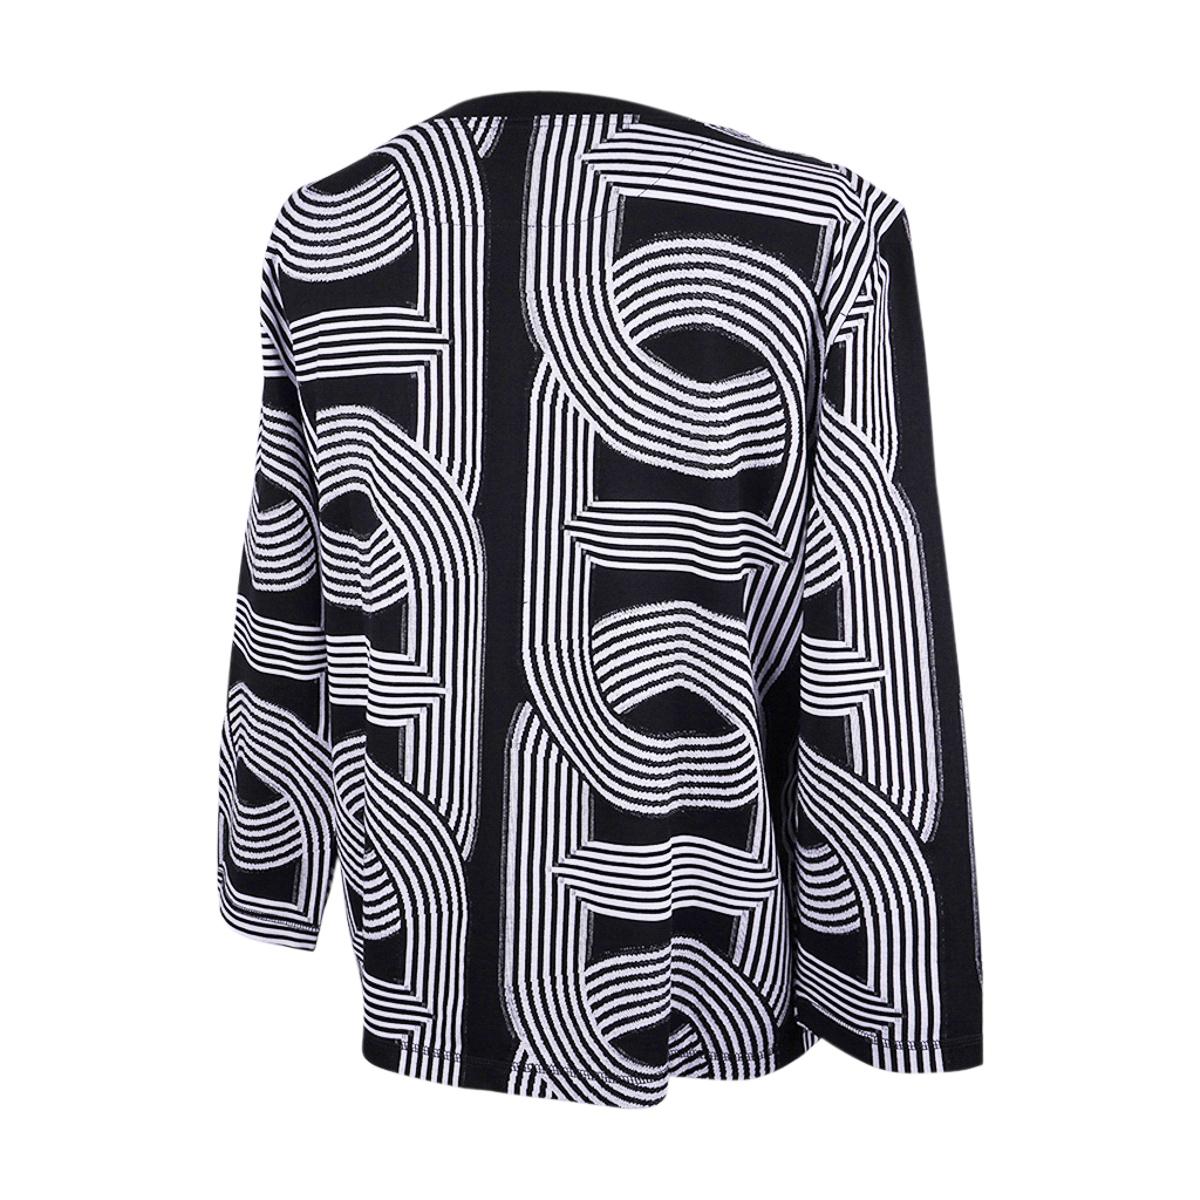 Hermes Circuit 24 Maxi Jacquard Black and White Top 42 / 8 For Sale 3